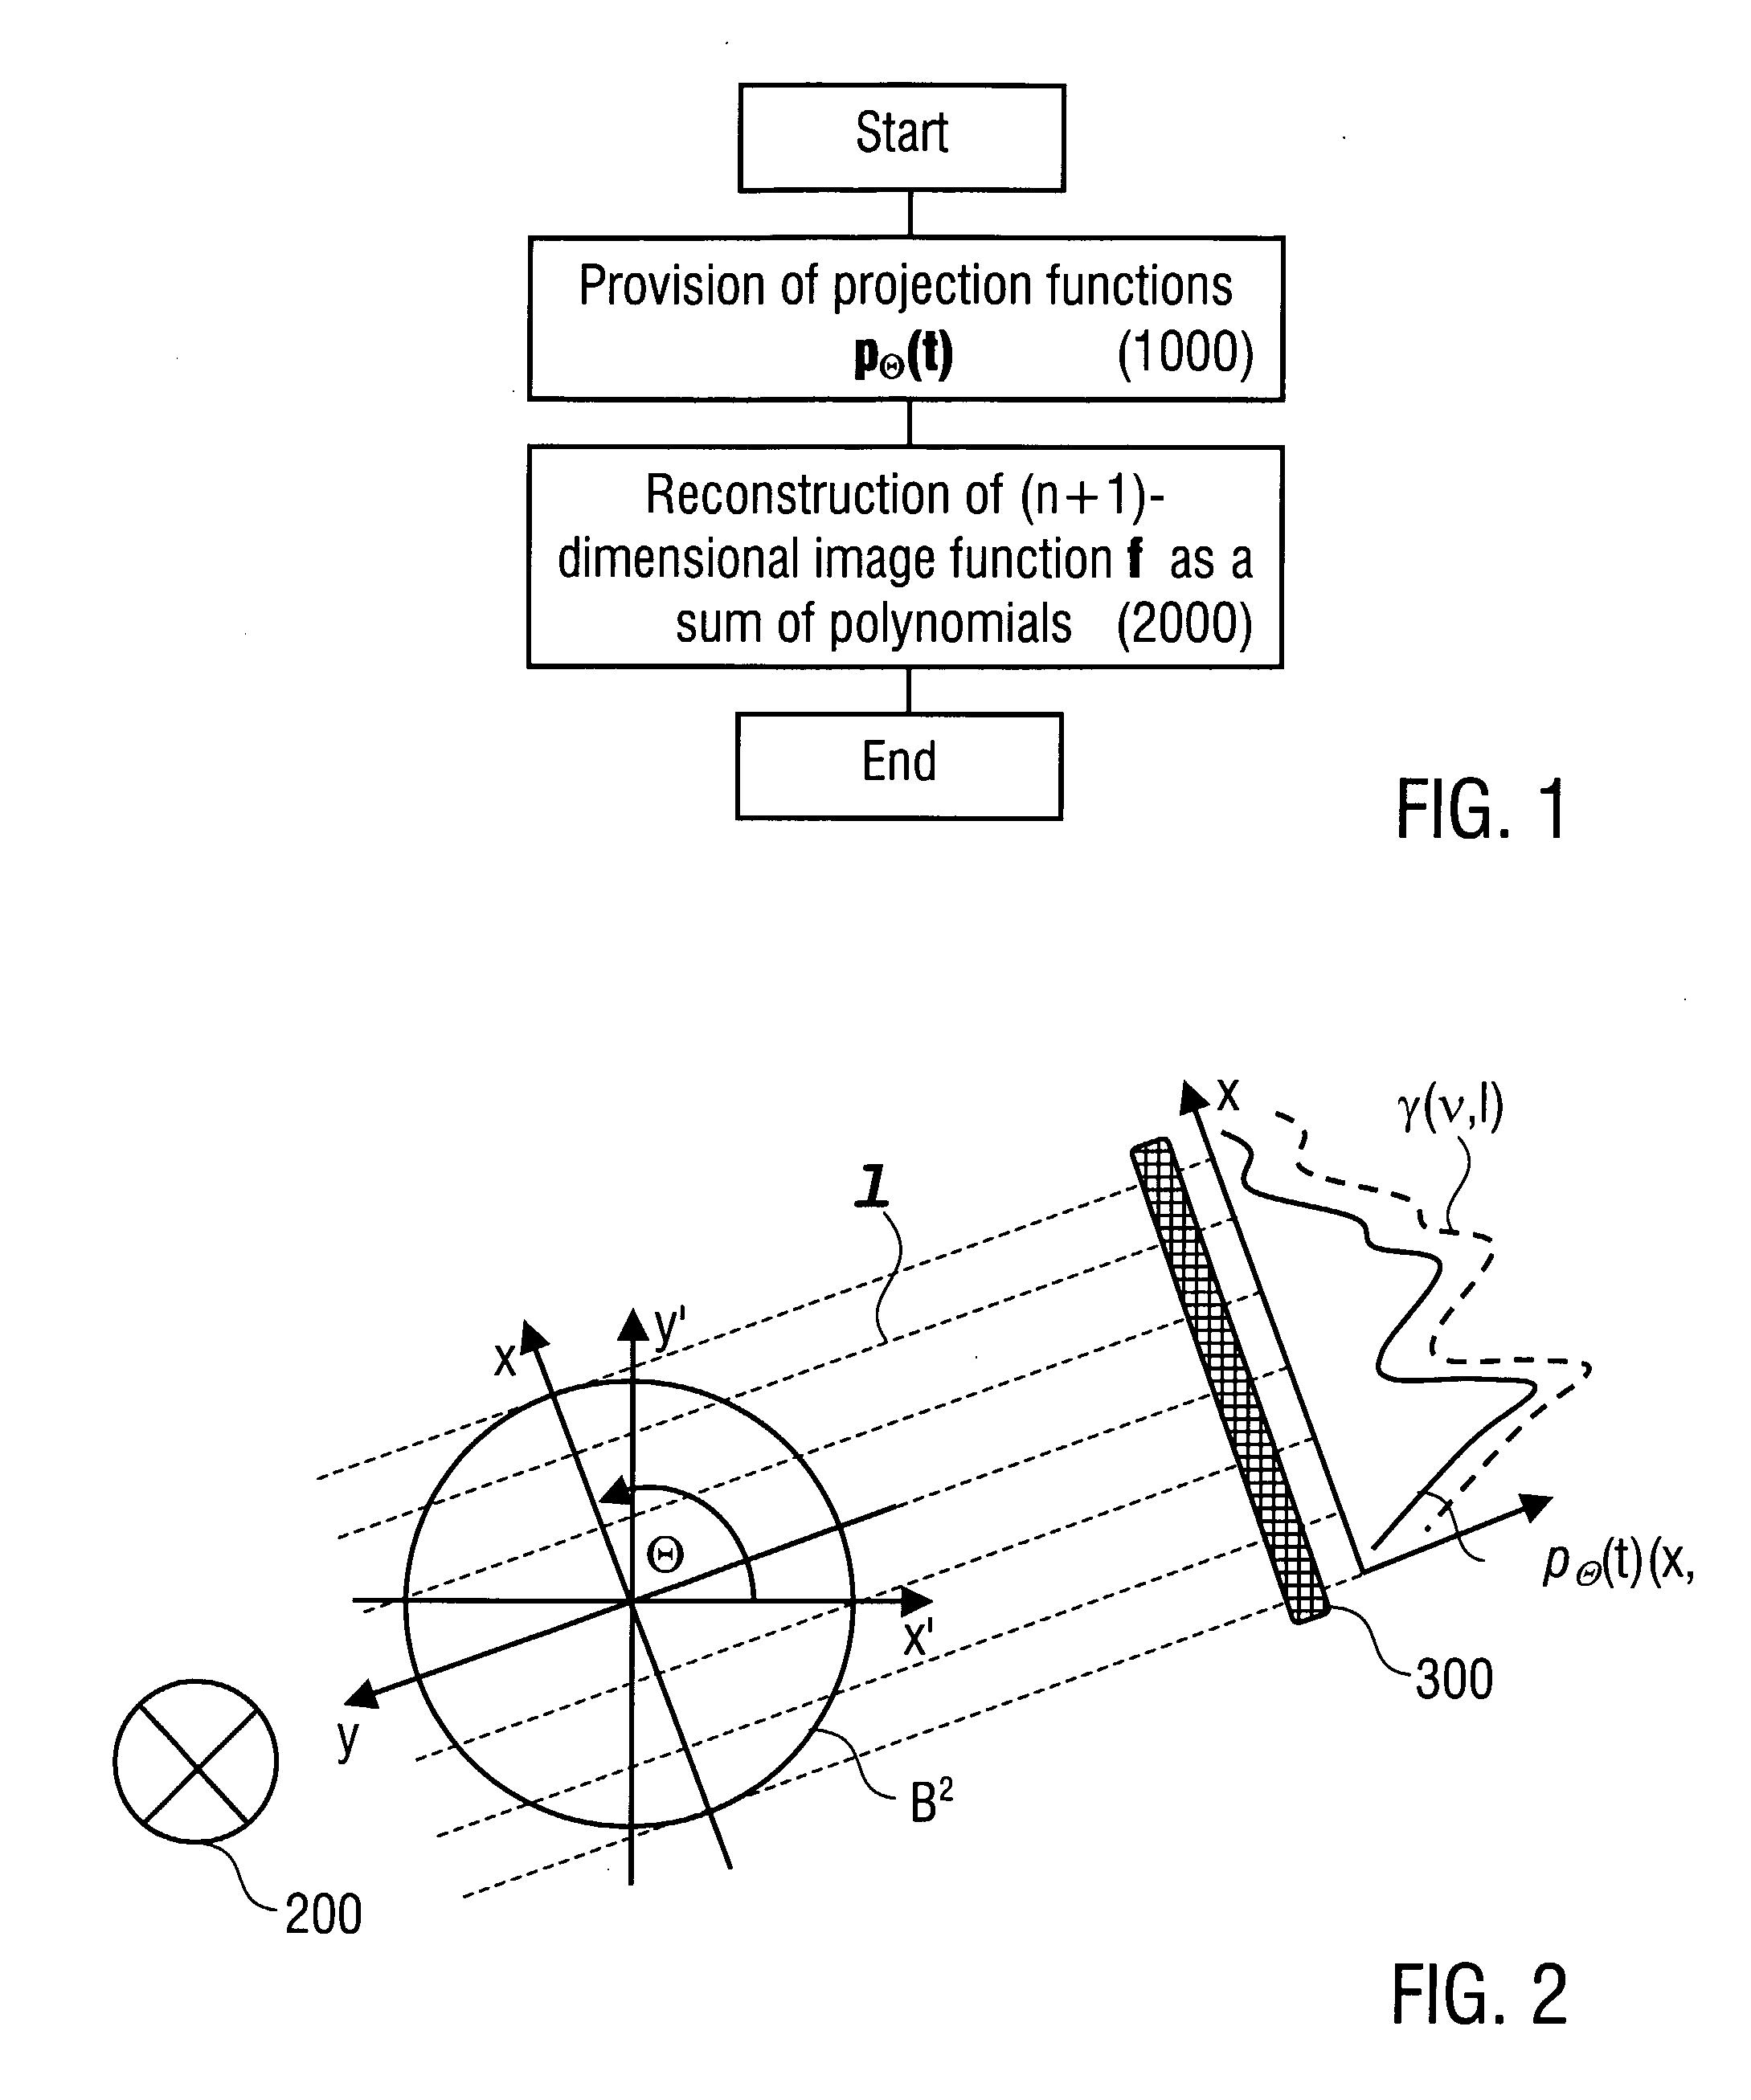 Method and Device of Reconstructing an (N+1)-Dimensional Image Function from Radon Data